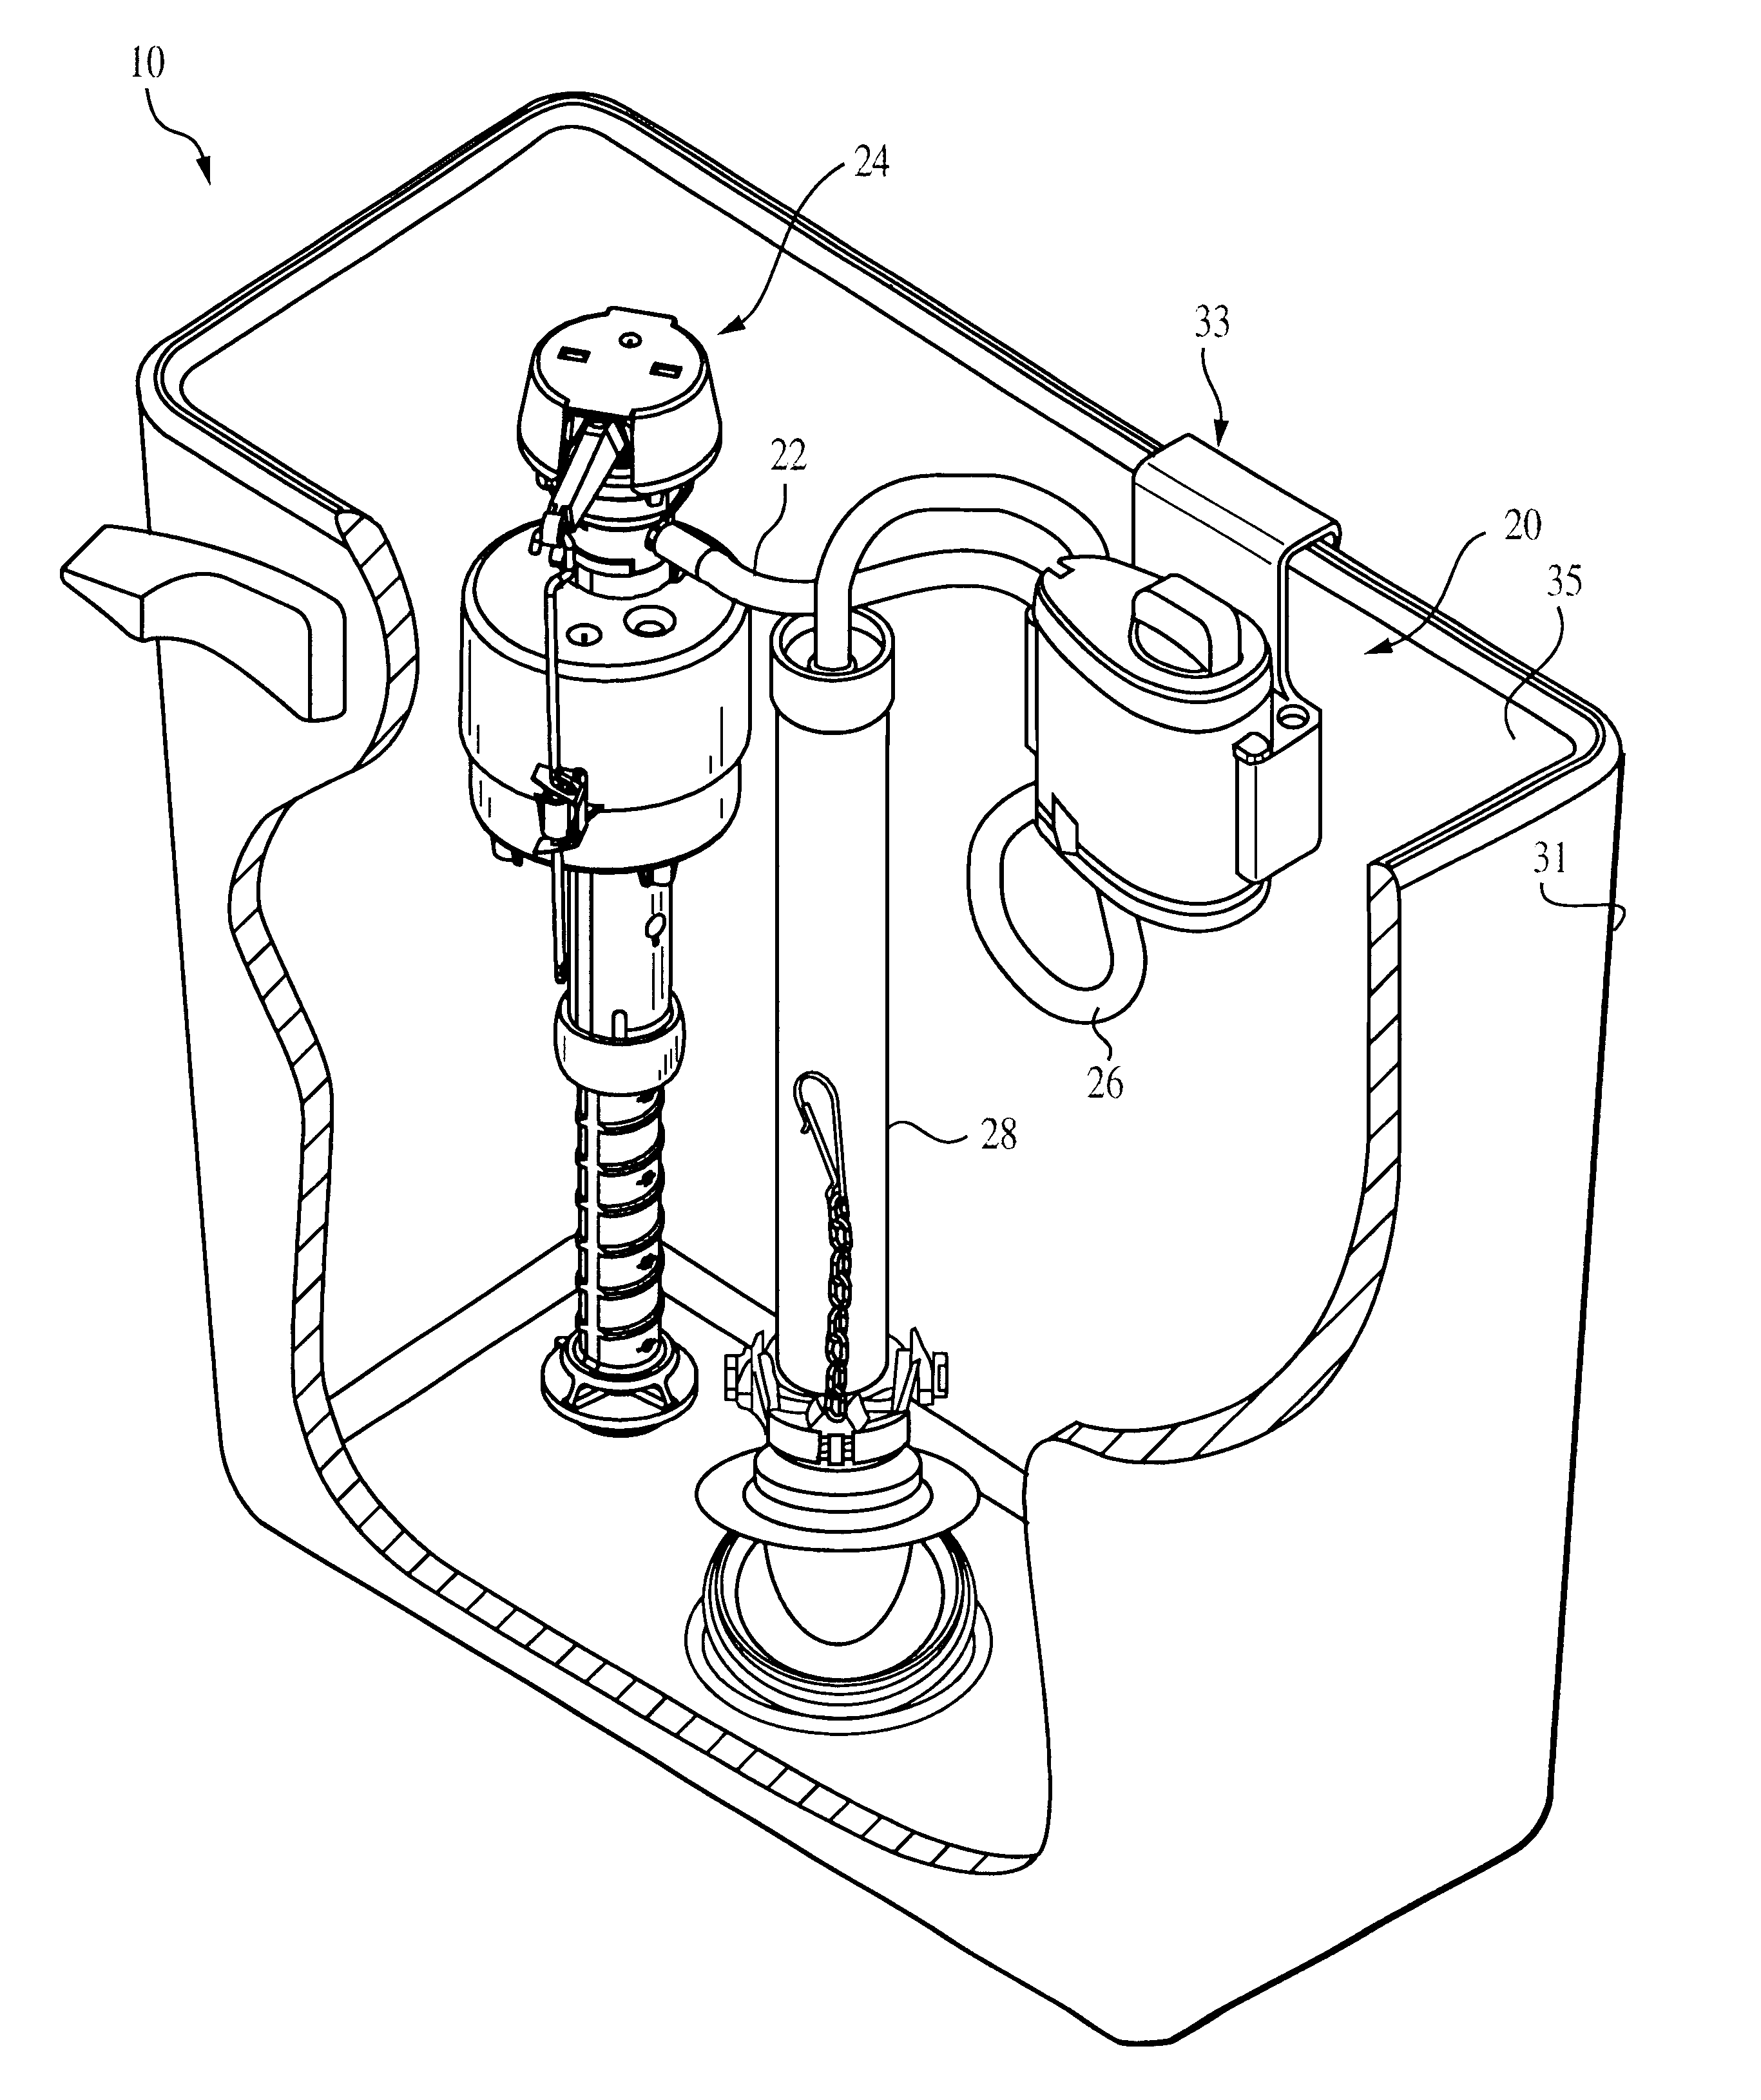 Toilet cleaning dispenser system with removable cartridge